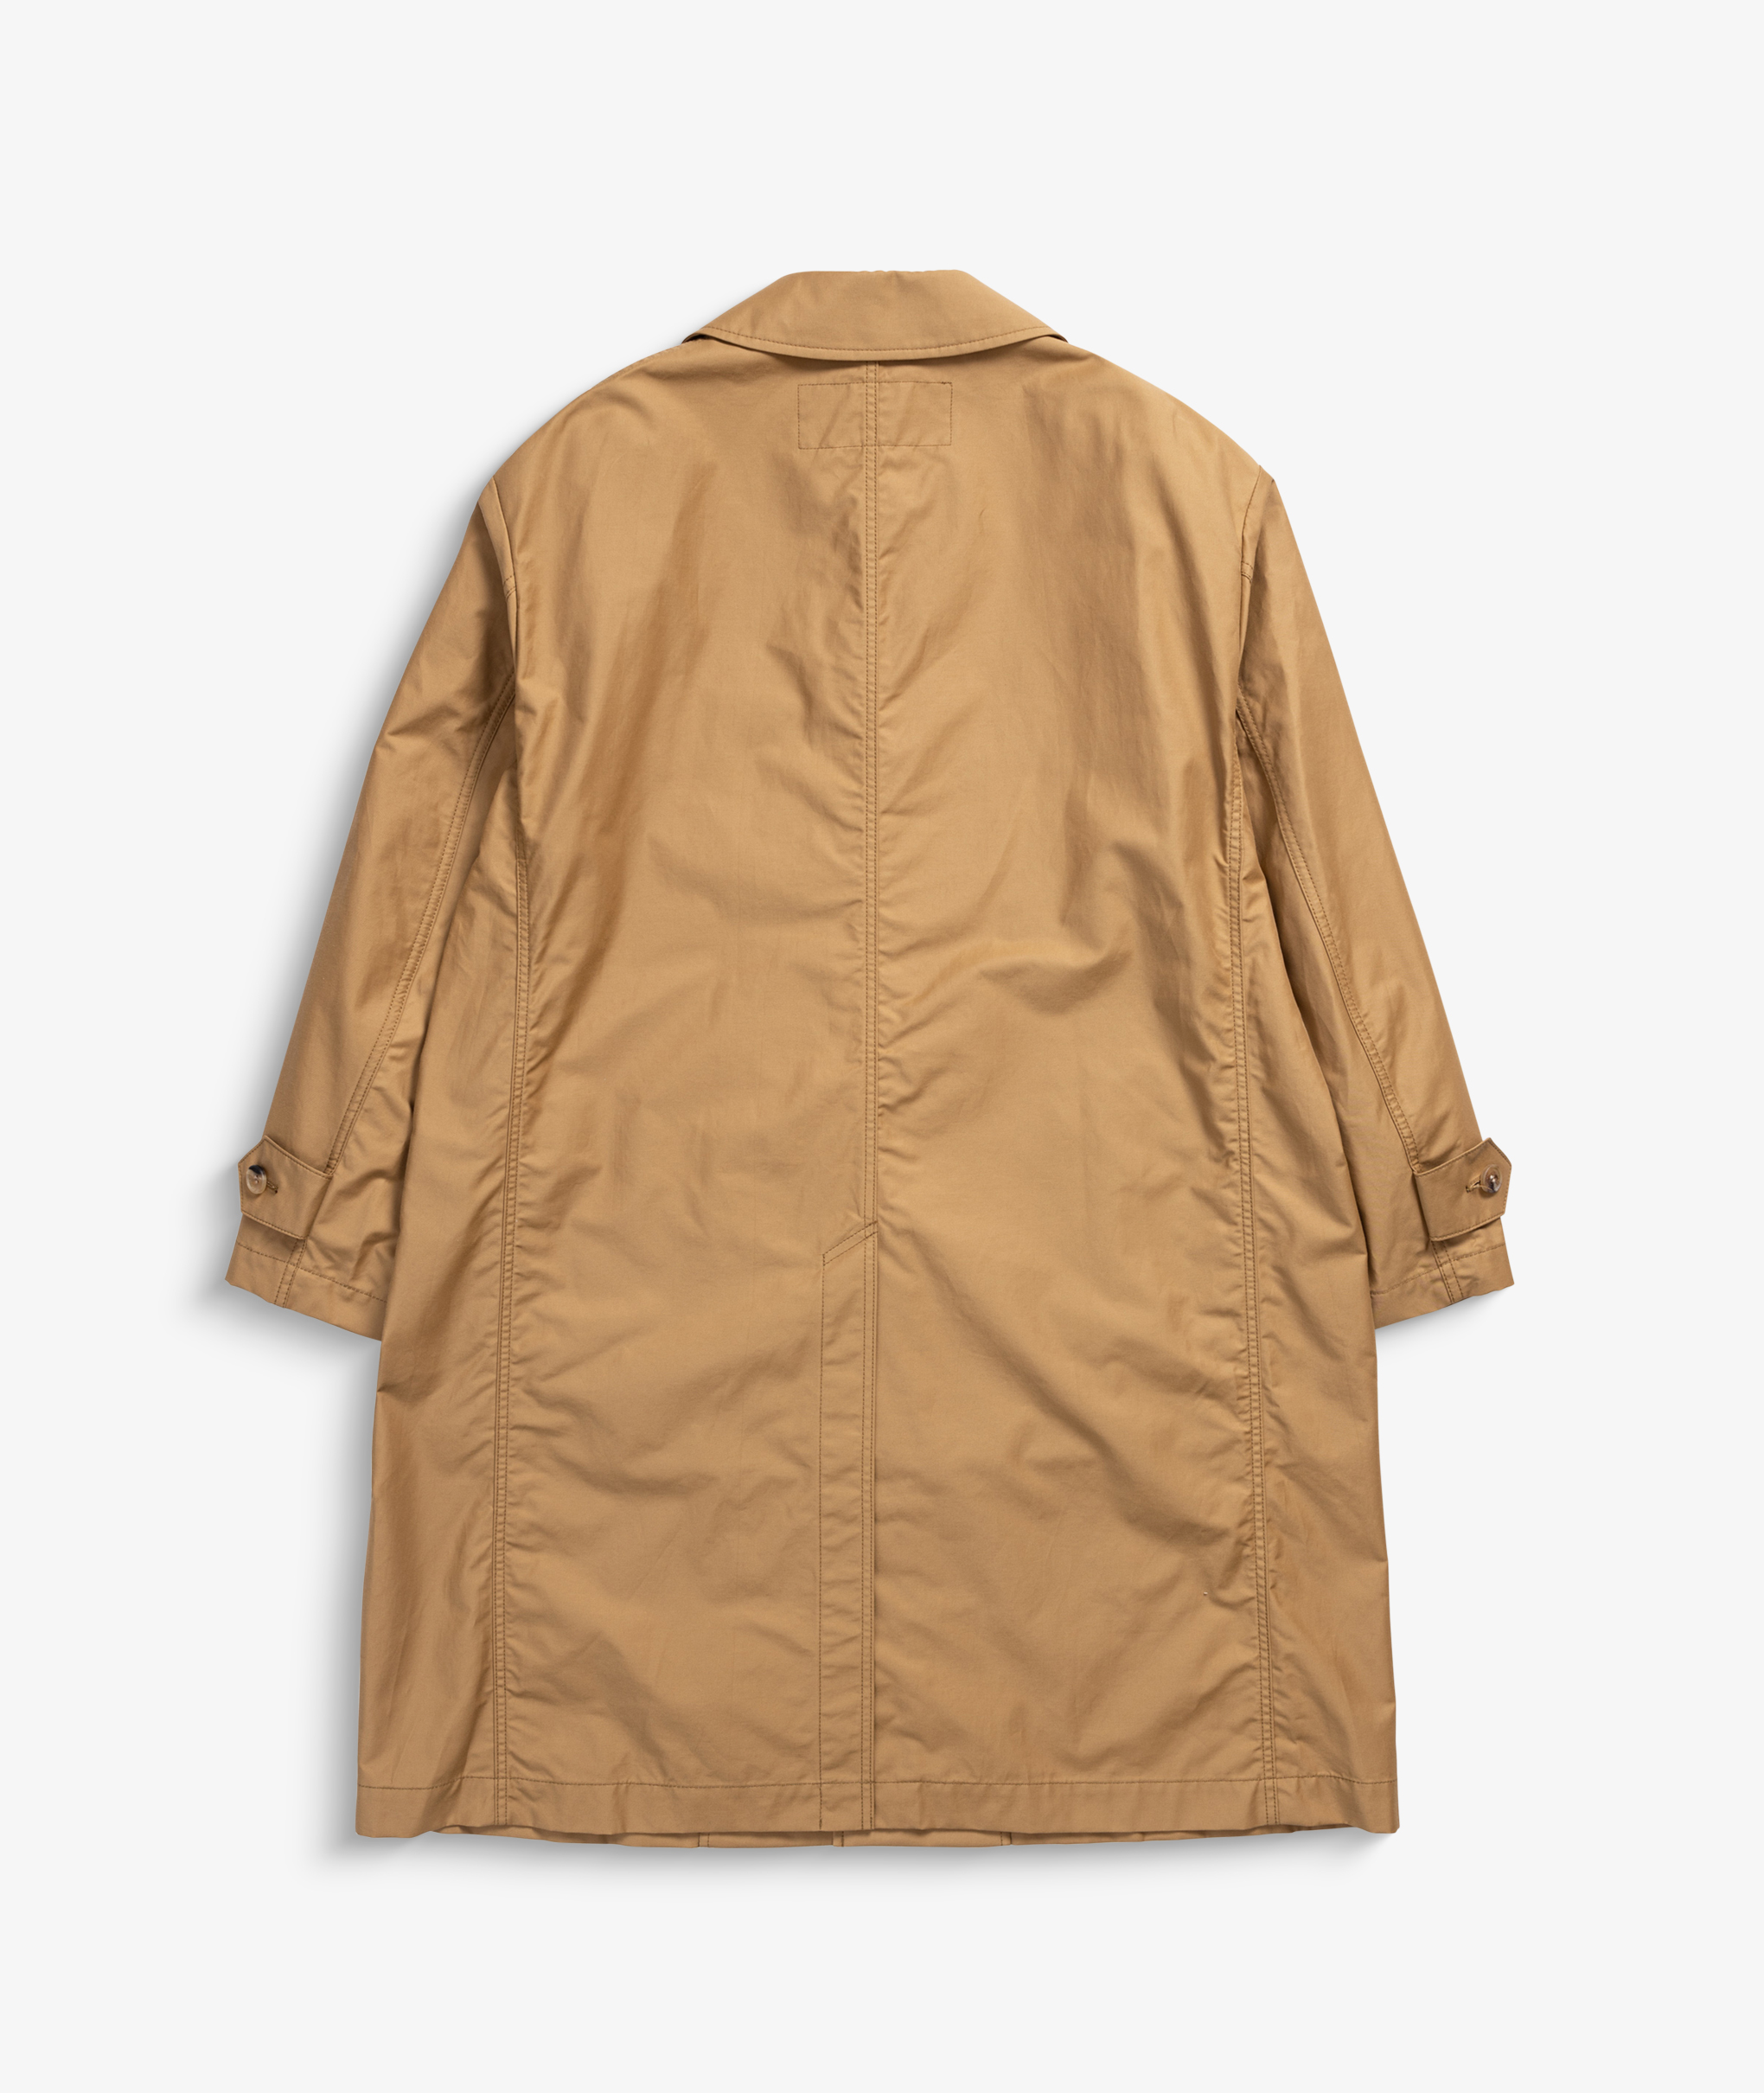 Norse Store | Shipping Worldwide - Comme Des Garcons Homme